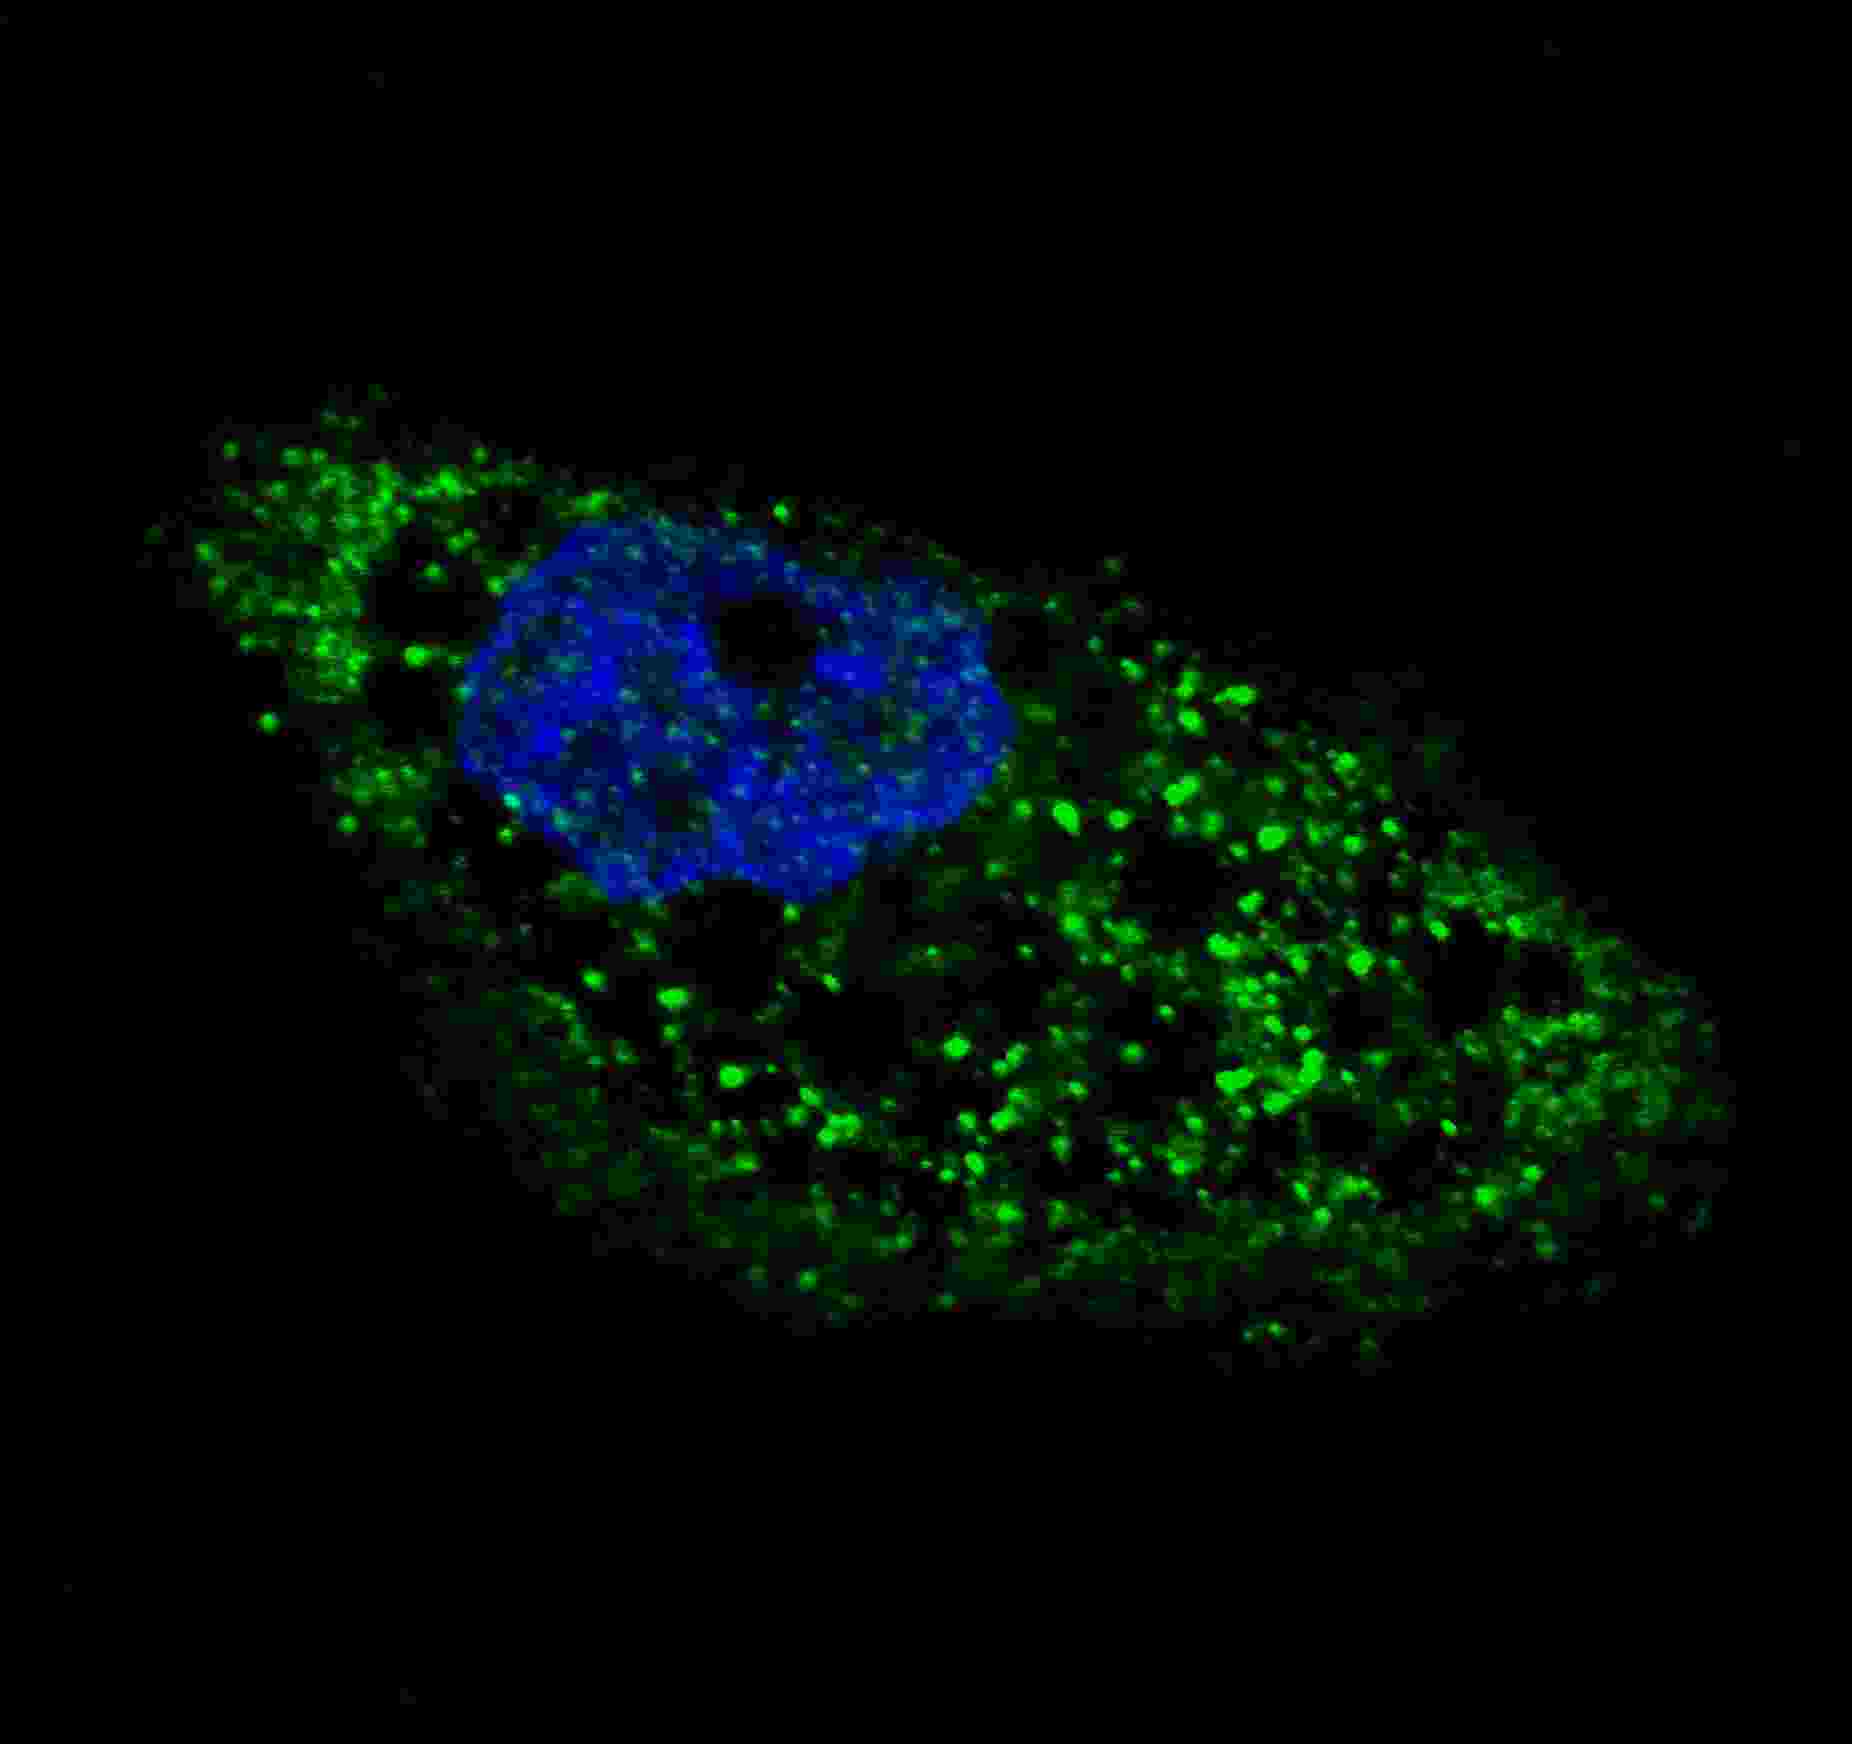 Fluorescent image of U251 cells stained with ATG4D (C-term) antibody. U251 cells were treated with Chloroquine (50 ?M,16h), then fixed with 4% PFA (20 min), permeabilized with Triton X-100 (0.2%, 30 min). Cells were then incubated with AP1811c ATG4D (C-term) primary antibody (1:100, 2 h at room temperature). For secondary antibody, Alexa Fluor� 488 conjugated donkey anti-rabbit antibody (green) was used (1:1000, 1h). Nuclei were counterstained with Hoechst 33342 (blue) (10 ?g/ml, 5 min). ATG4D immunoreactivity is localized to autophagic vacuoles in the cytoplasm of U251 cells.